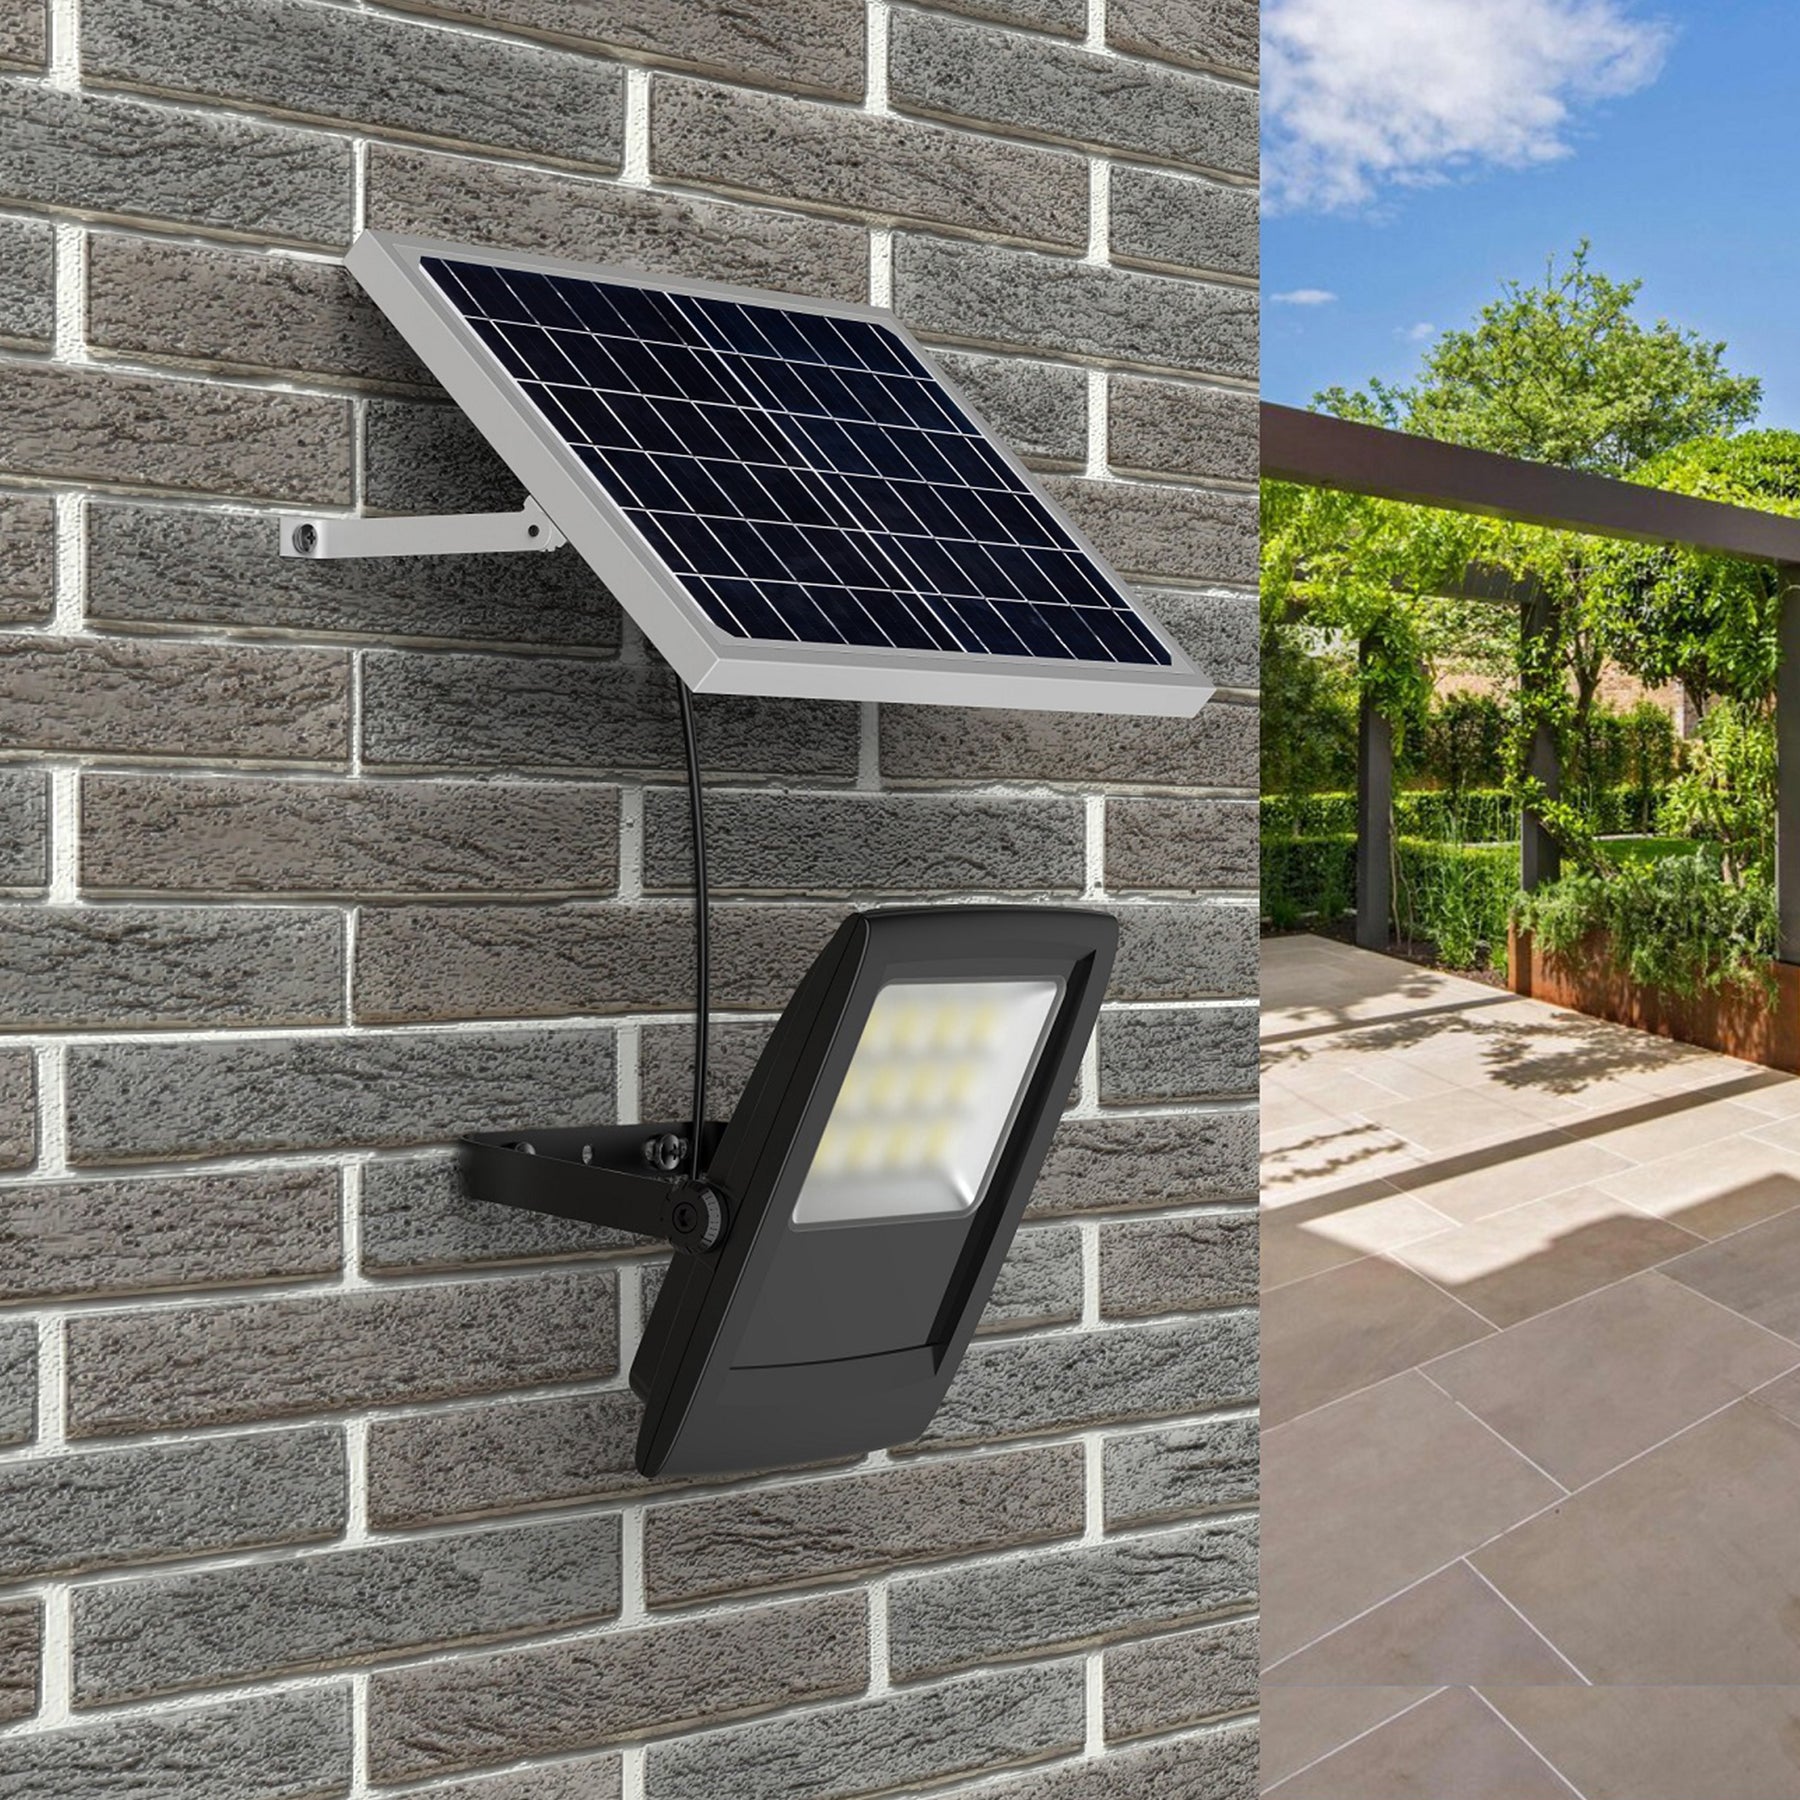 Solar LED Flood Light, 6000K, Auto On/Off, IP65 Waterproof, with Remote Control & Motion Sensors Detection